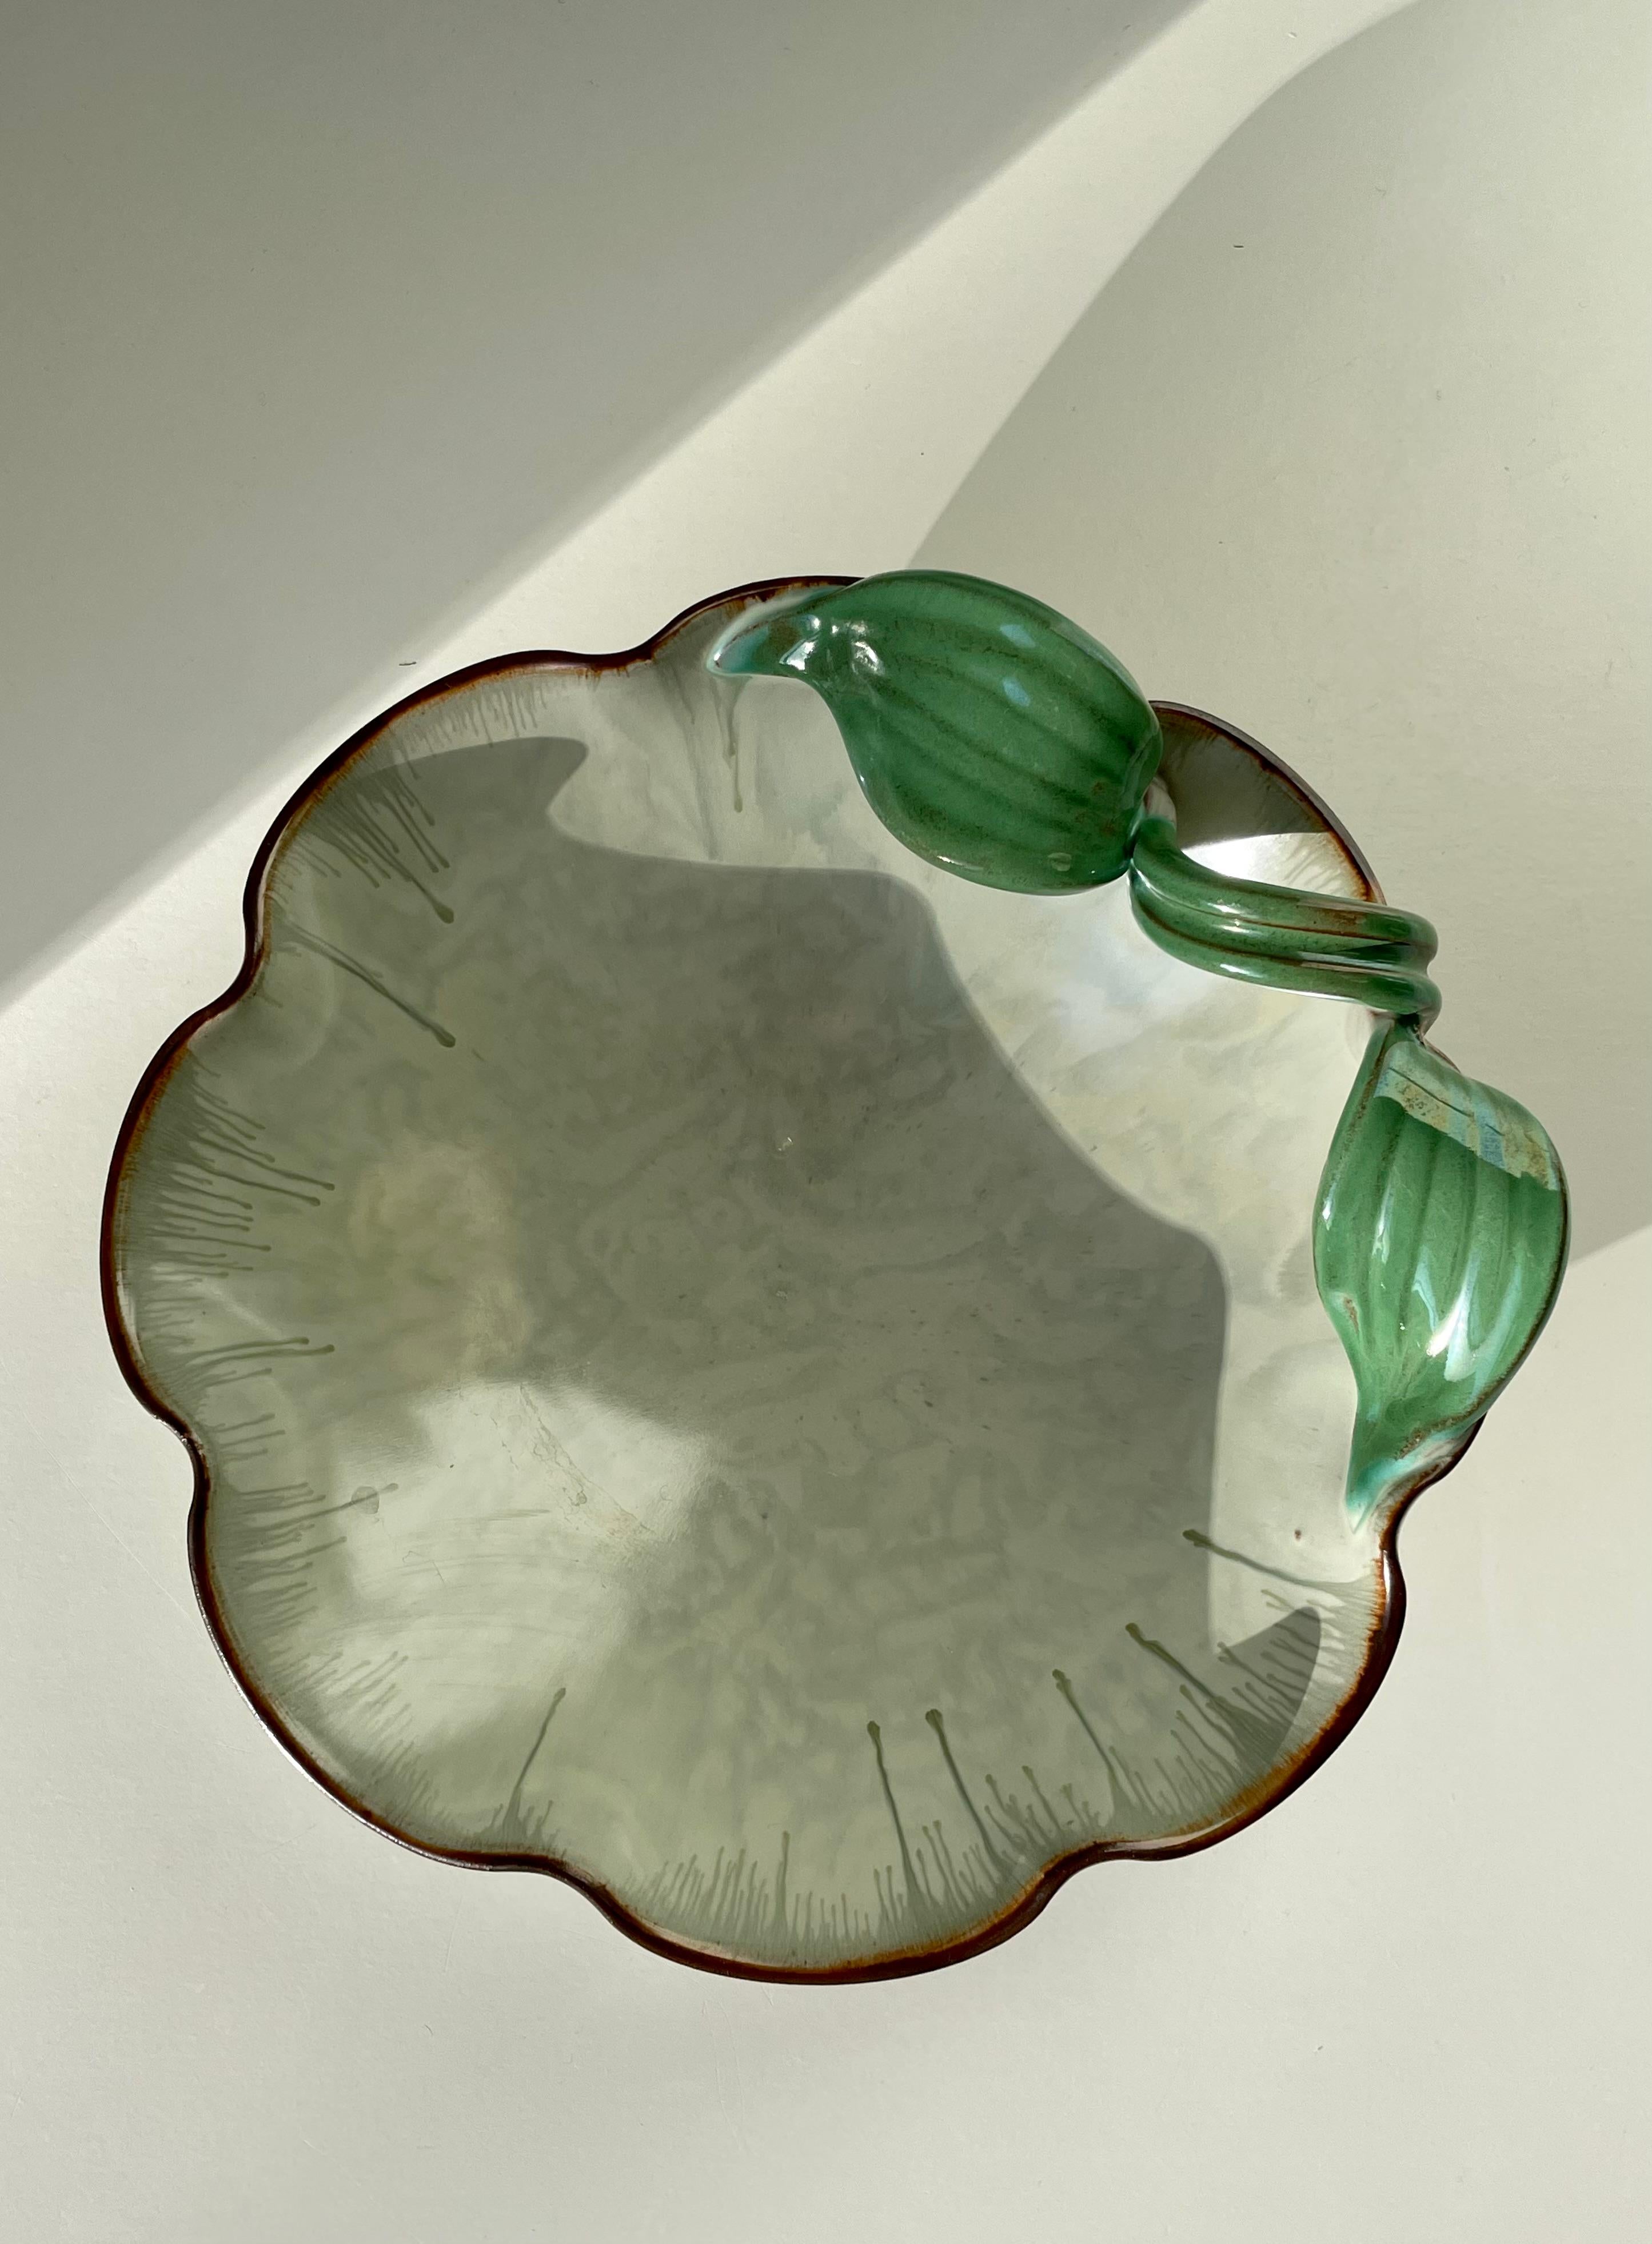 Stunning handmade Swedish 1940s Art Nouveau decorative vide poche bowl. Green leaves organically pouring over one side of the light green piece with thin decorative lines of running glaze on all sides. Stamped under base. Beautiful vintage